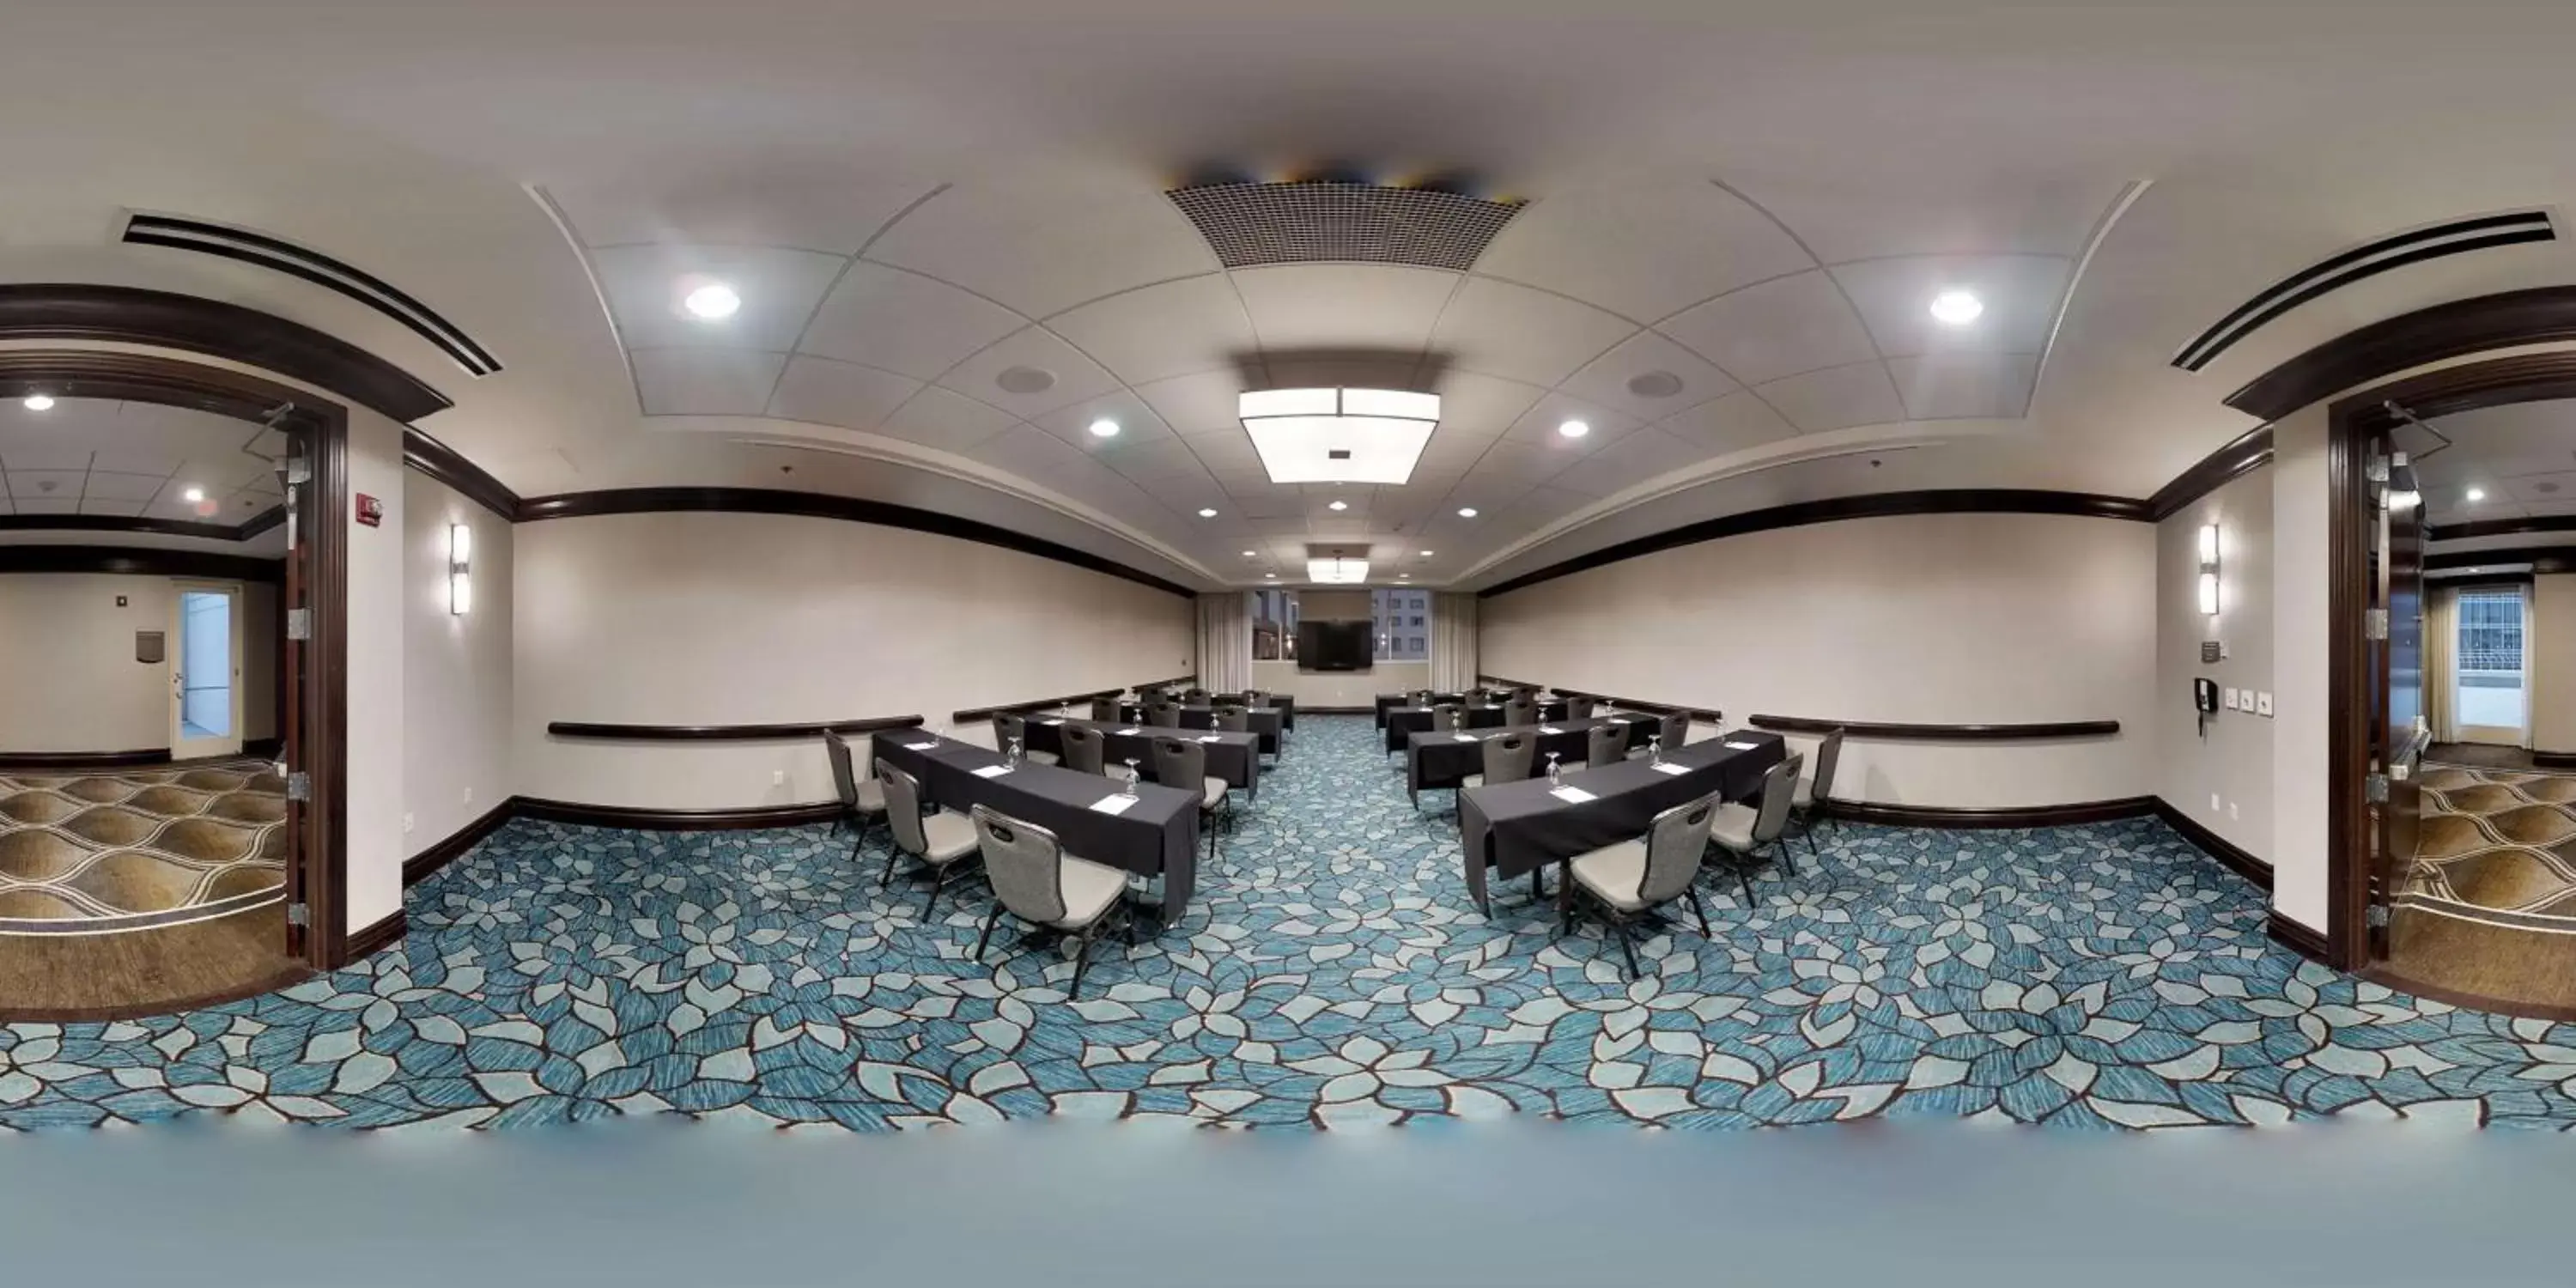 Meeting/conference room, Banquet Facilities in Hilton Nashville Downtown